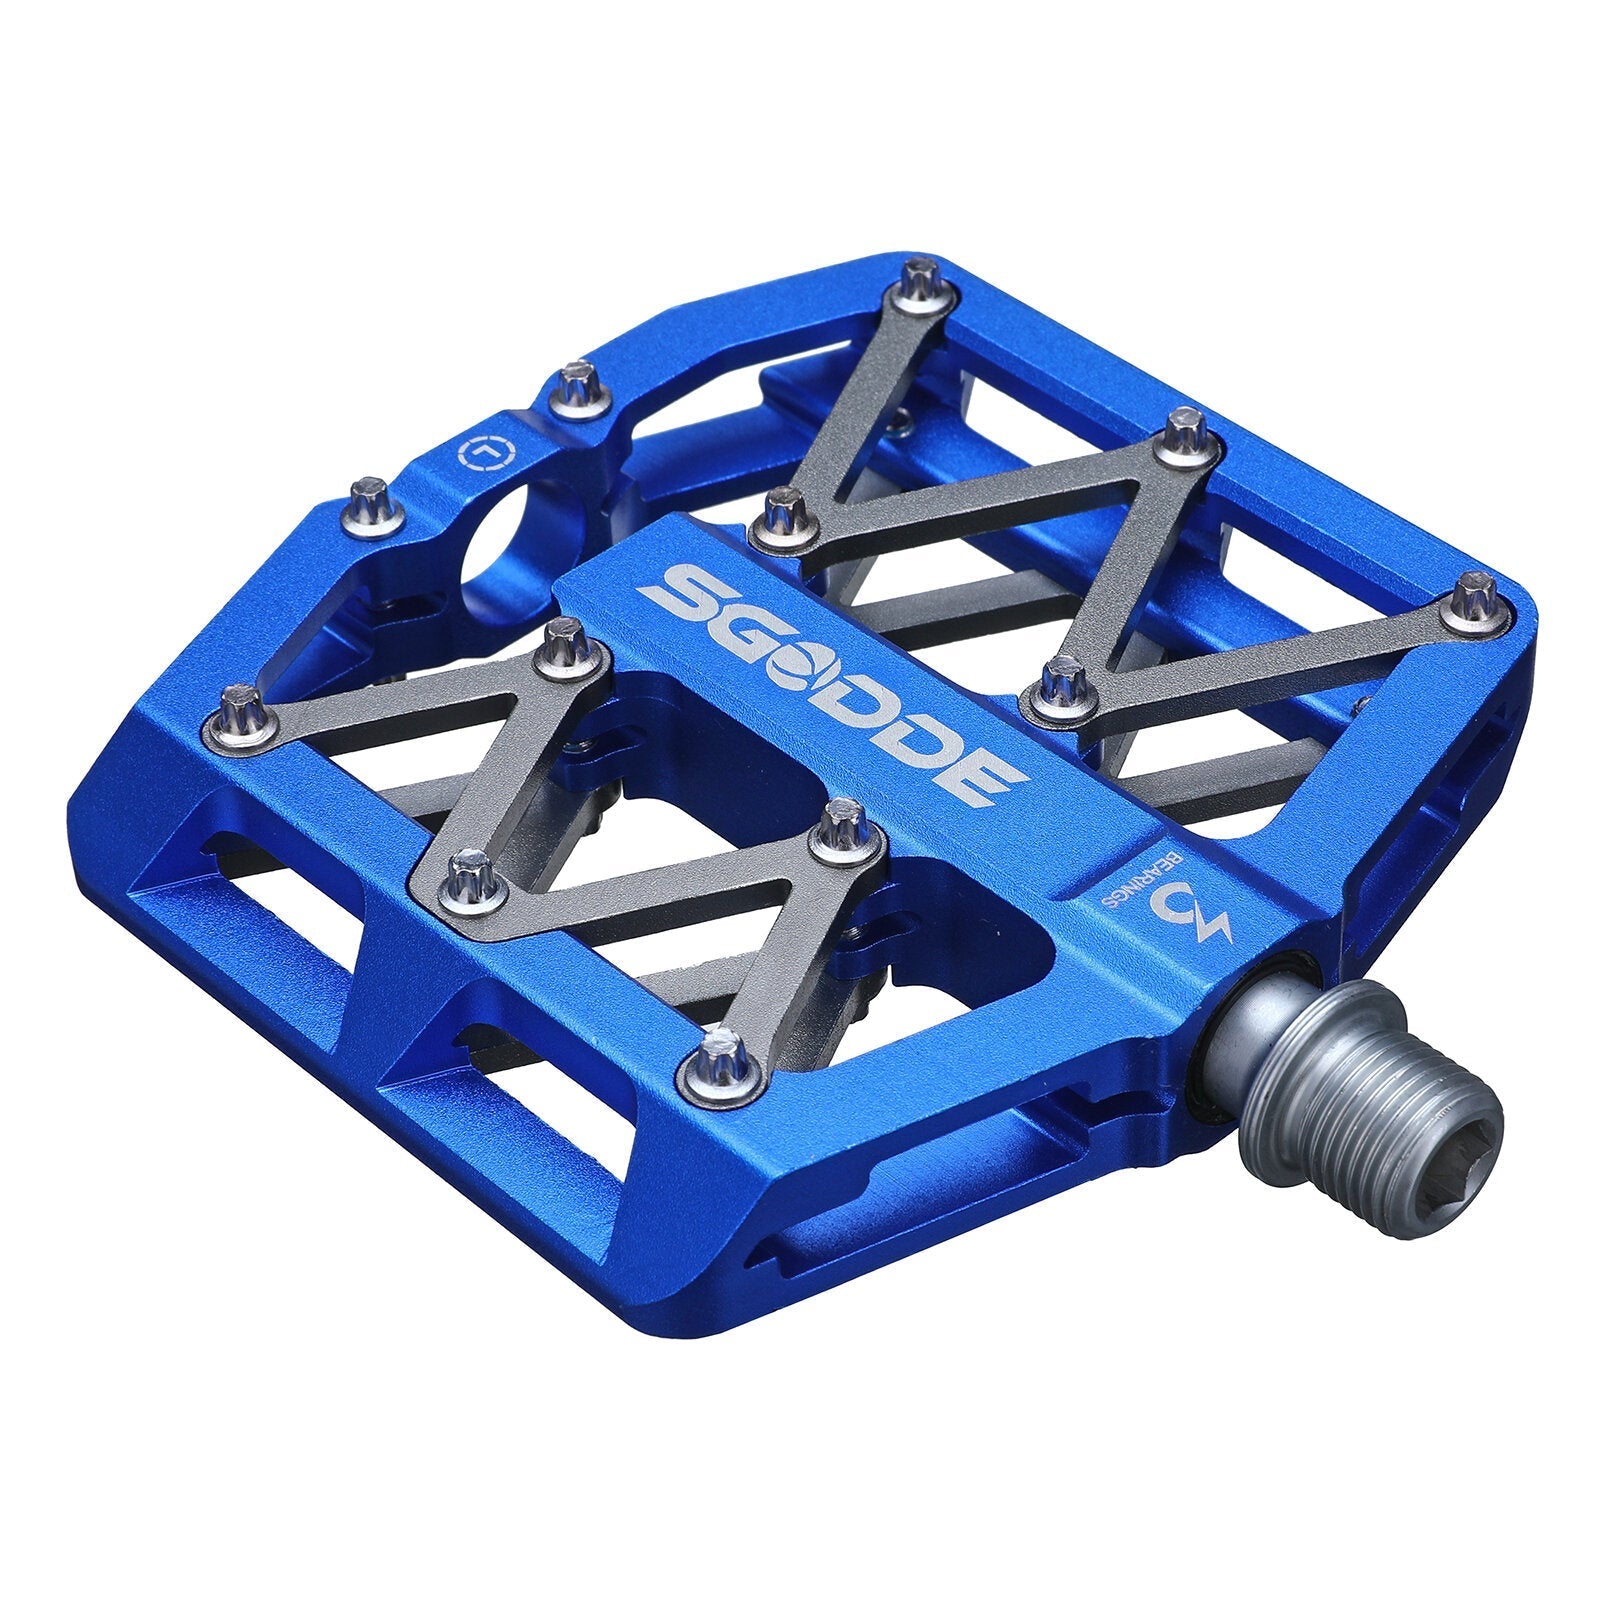 Bicycle Mountain Bike Pedals Platform Bicycle Flat Non-Slip Outdoor Cycling Flat Pedals